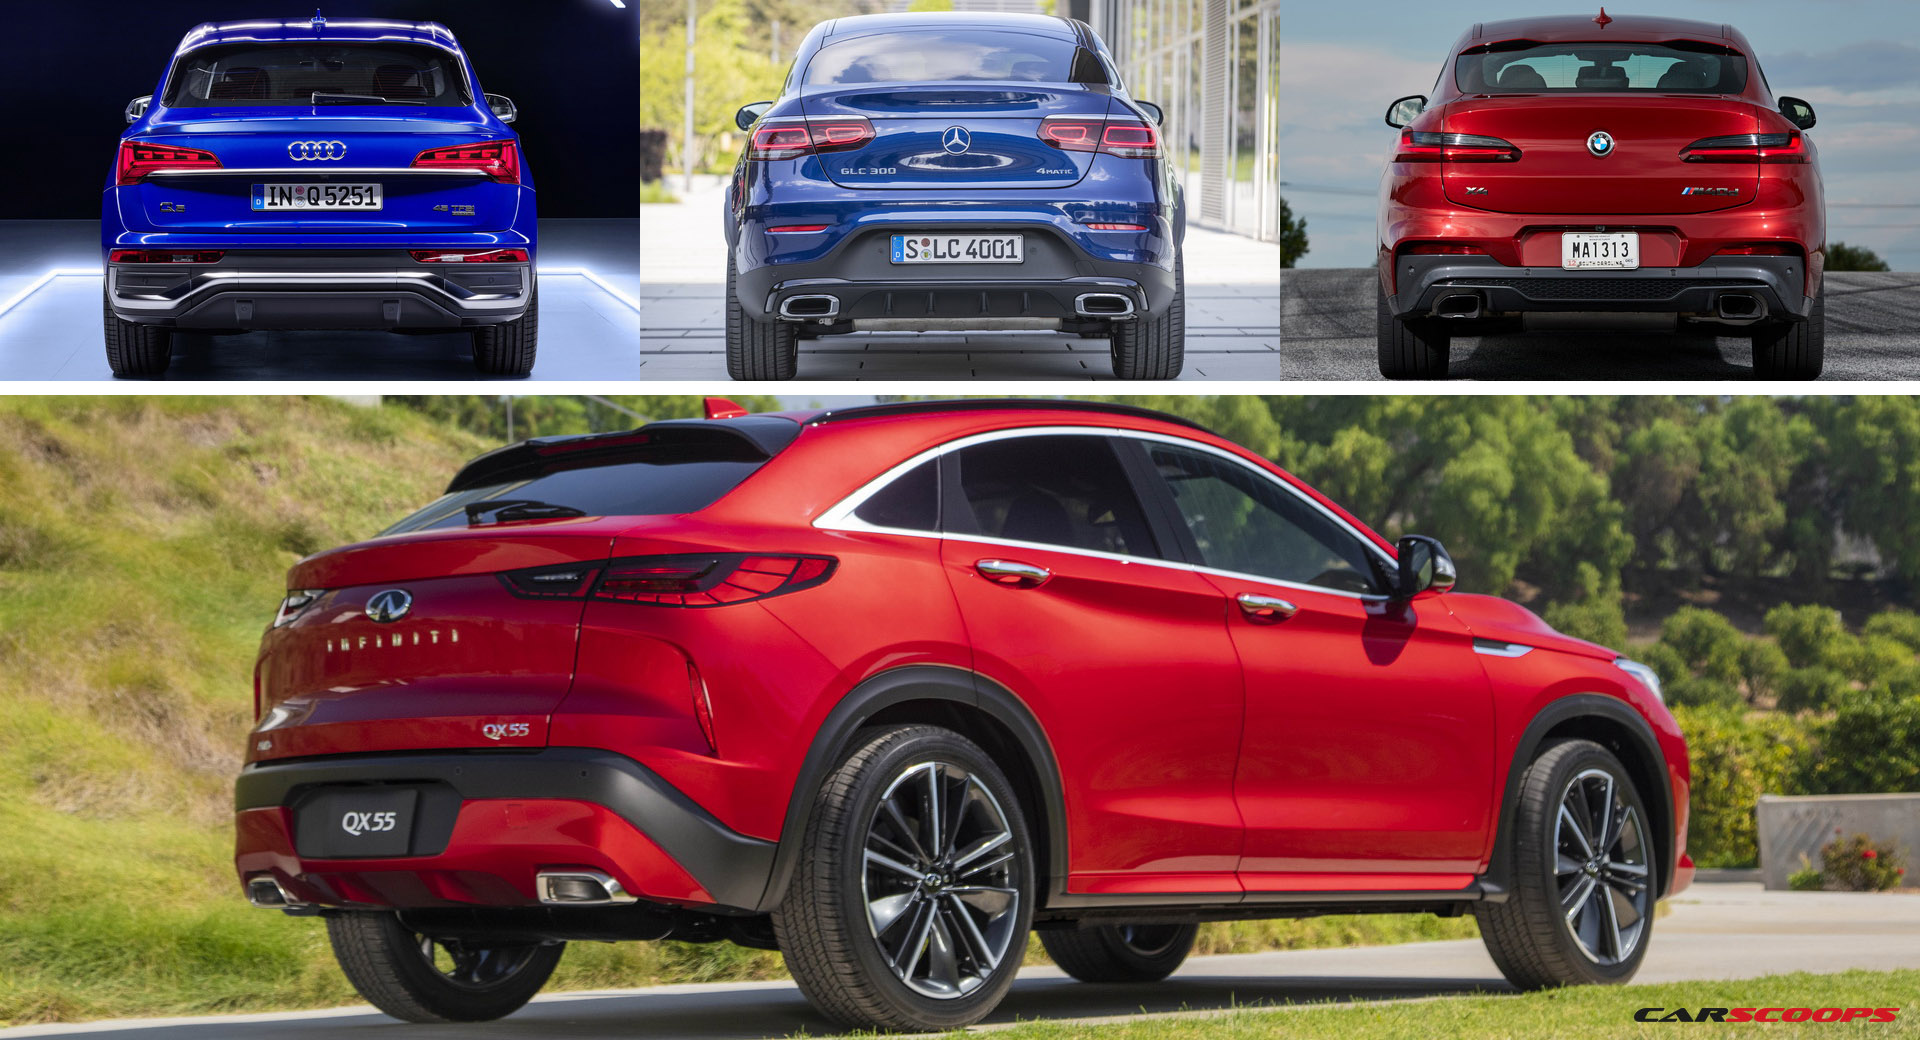 2022 Infiniti QX55: How Does It Stack Up Against The Audi Q5 Sportback